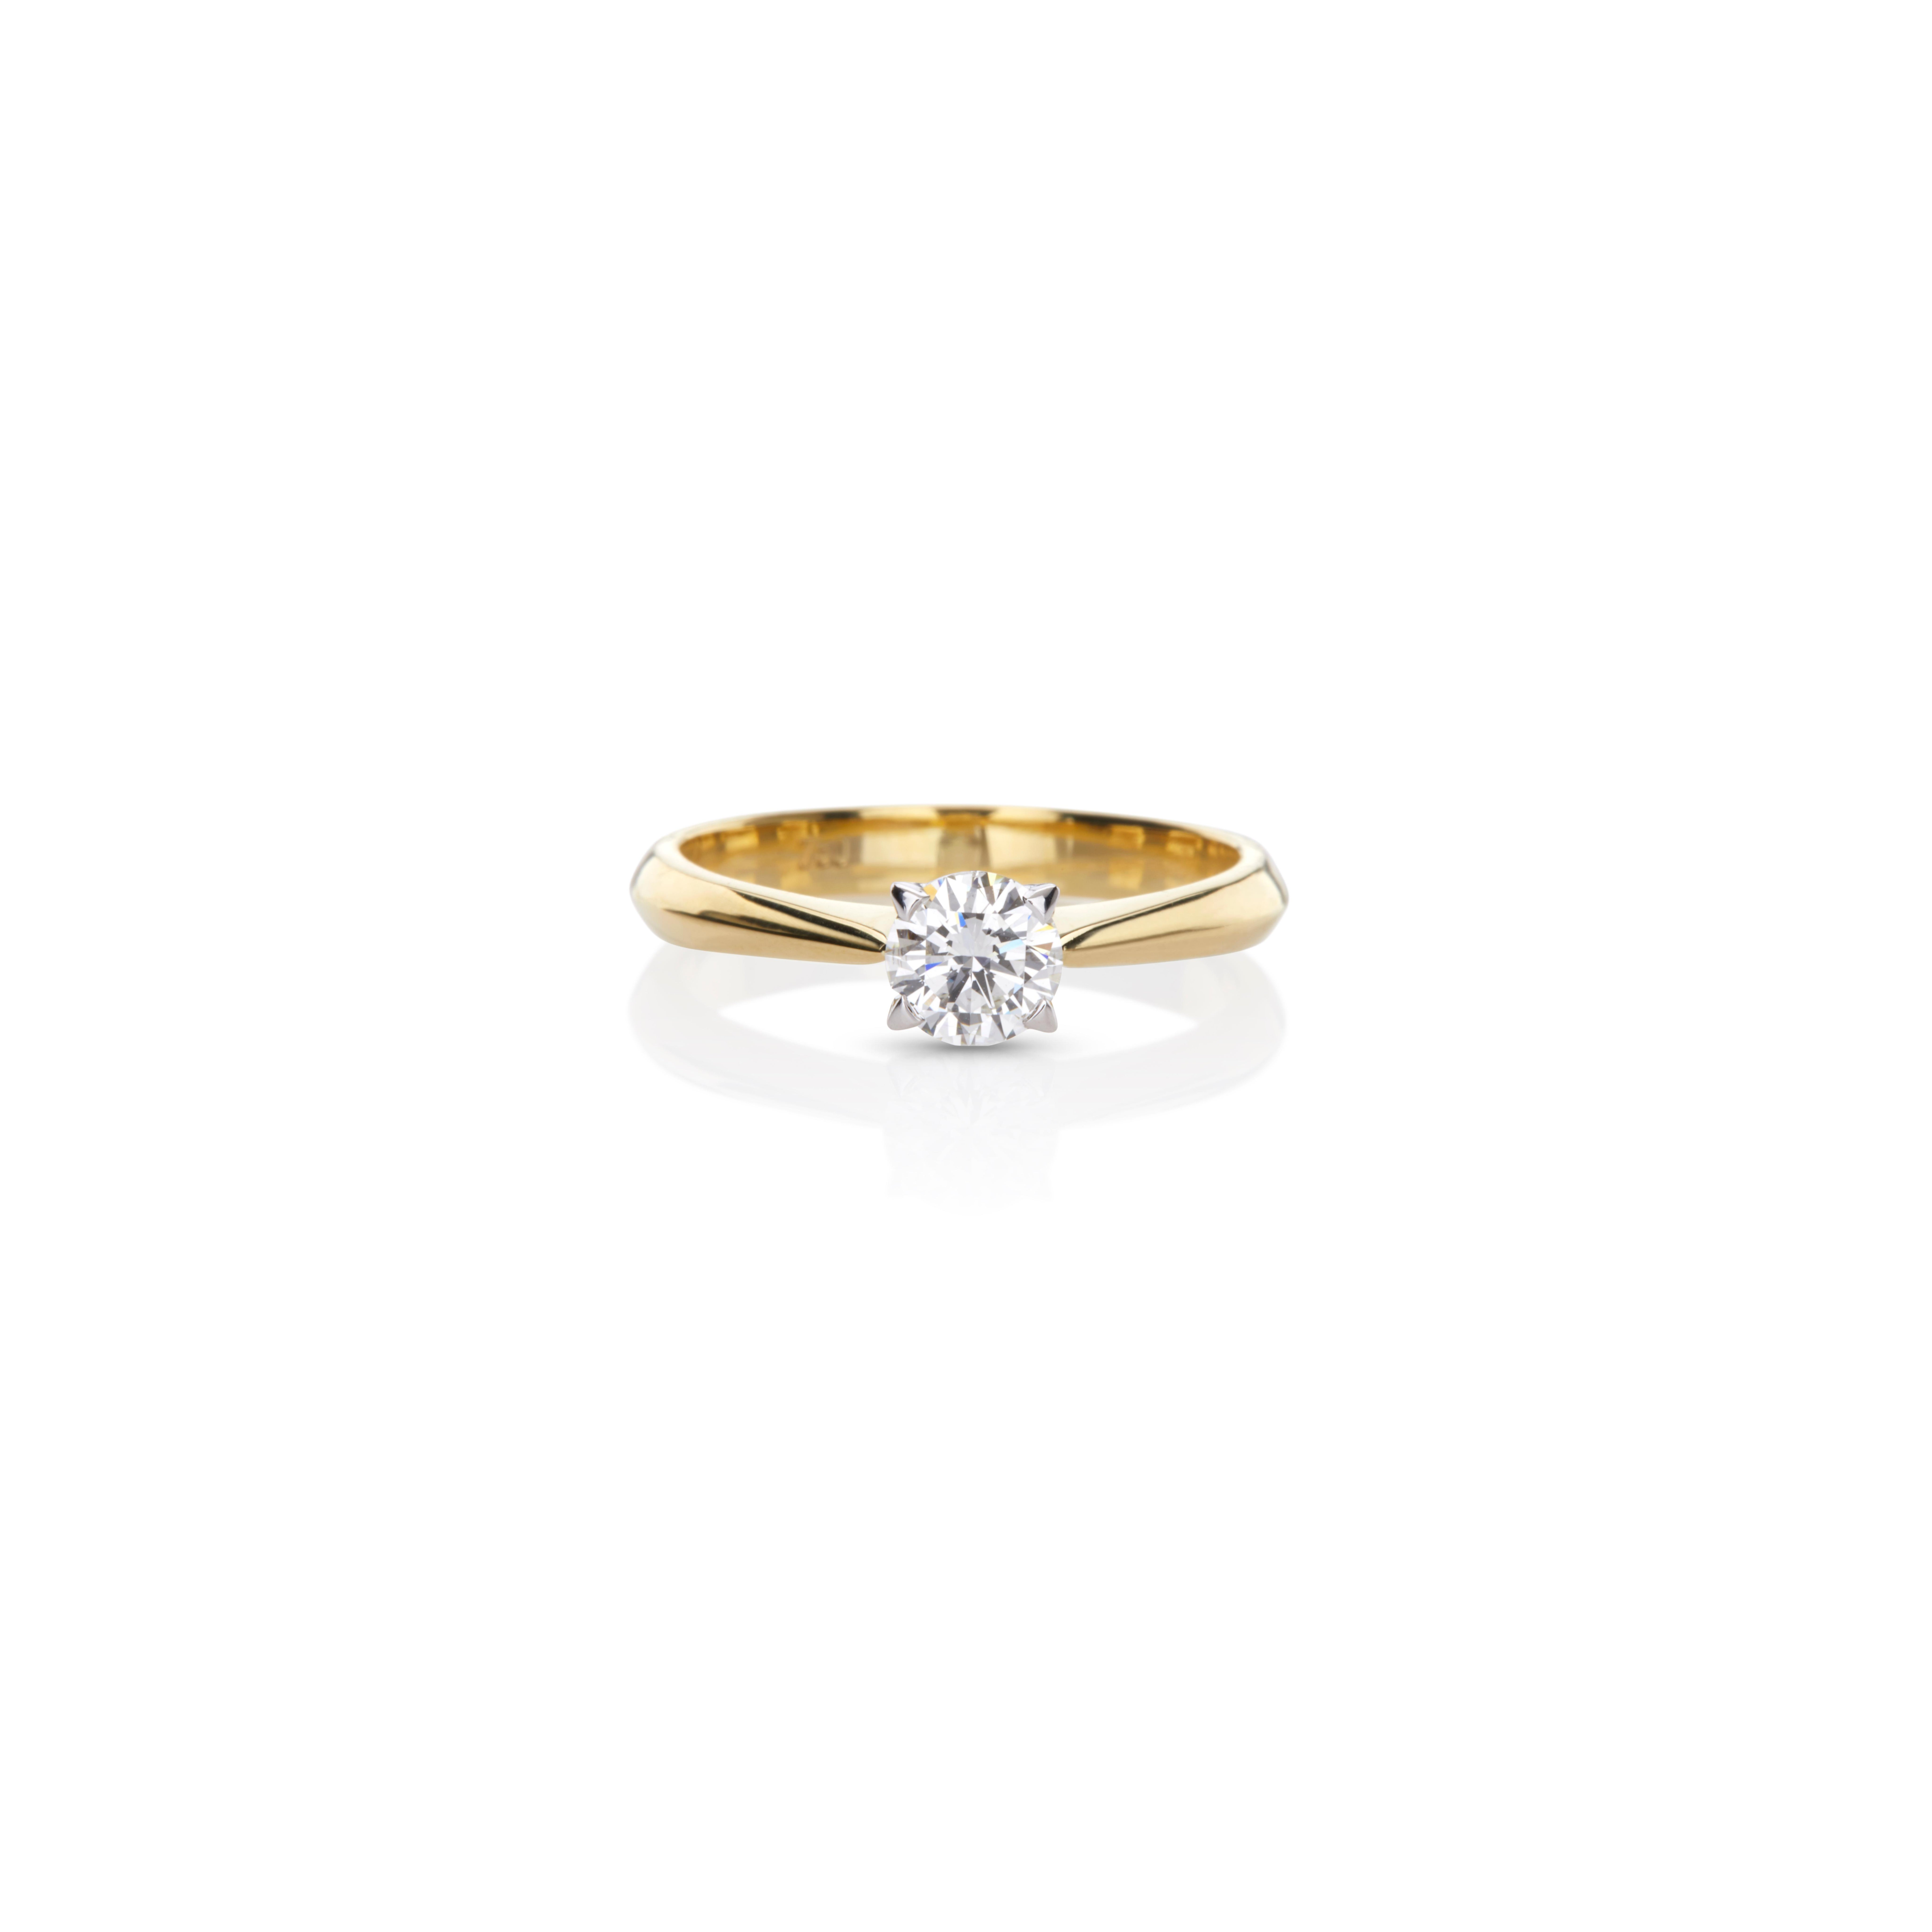 Romantic Solitaire Ring with GIA Certified 0.51 Carat Diamond 18Kt Yellow and White Gold For Sale